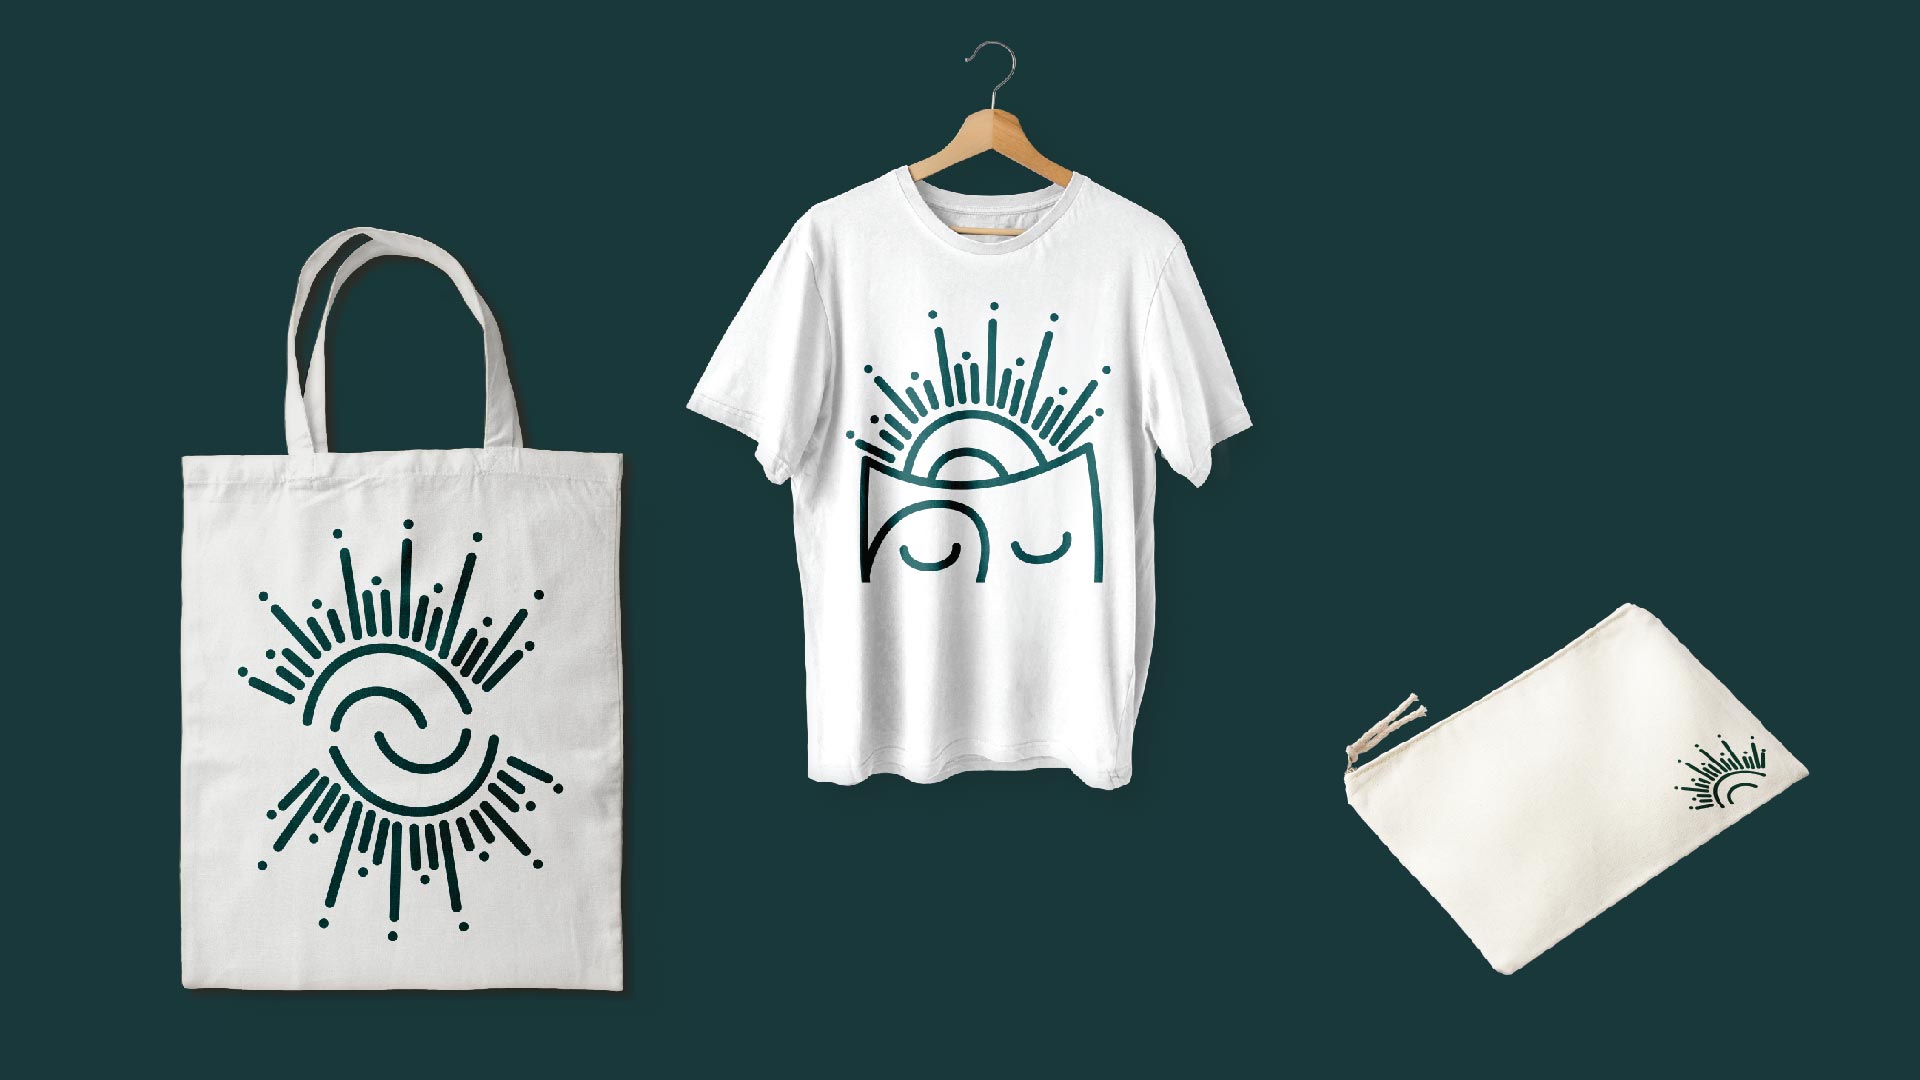 Tote bag, Shirt, and Pouch for the Mental Health School Supplies